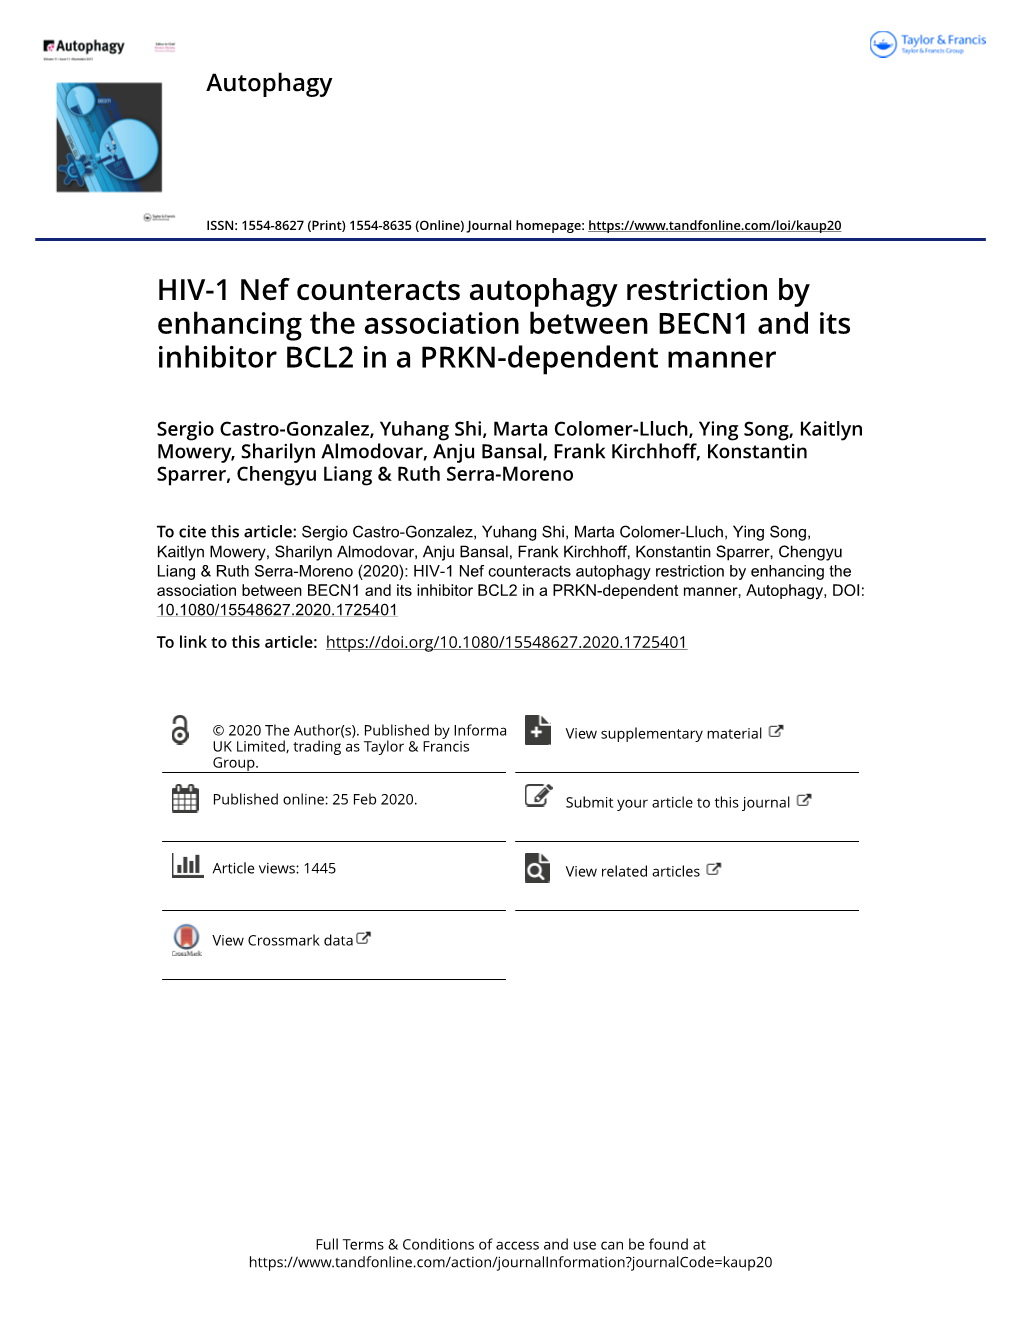 HIV-1 Nef Counteracts Autophagy Restriction by Enhancing the Association Between BECN1 and Its Inhibitor BCL2 in a PRKN-Dependent Manner